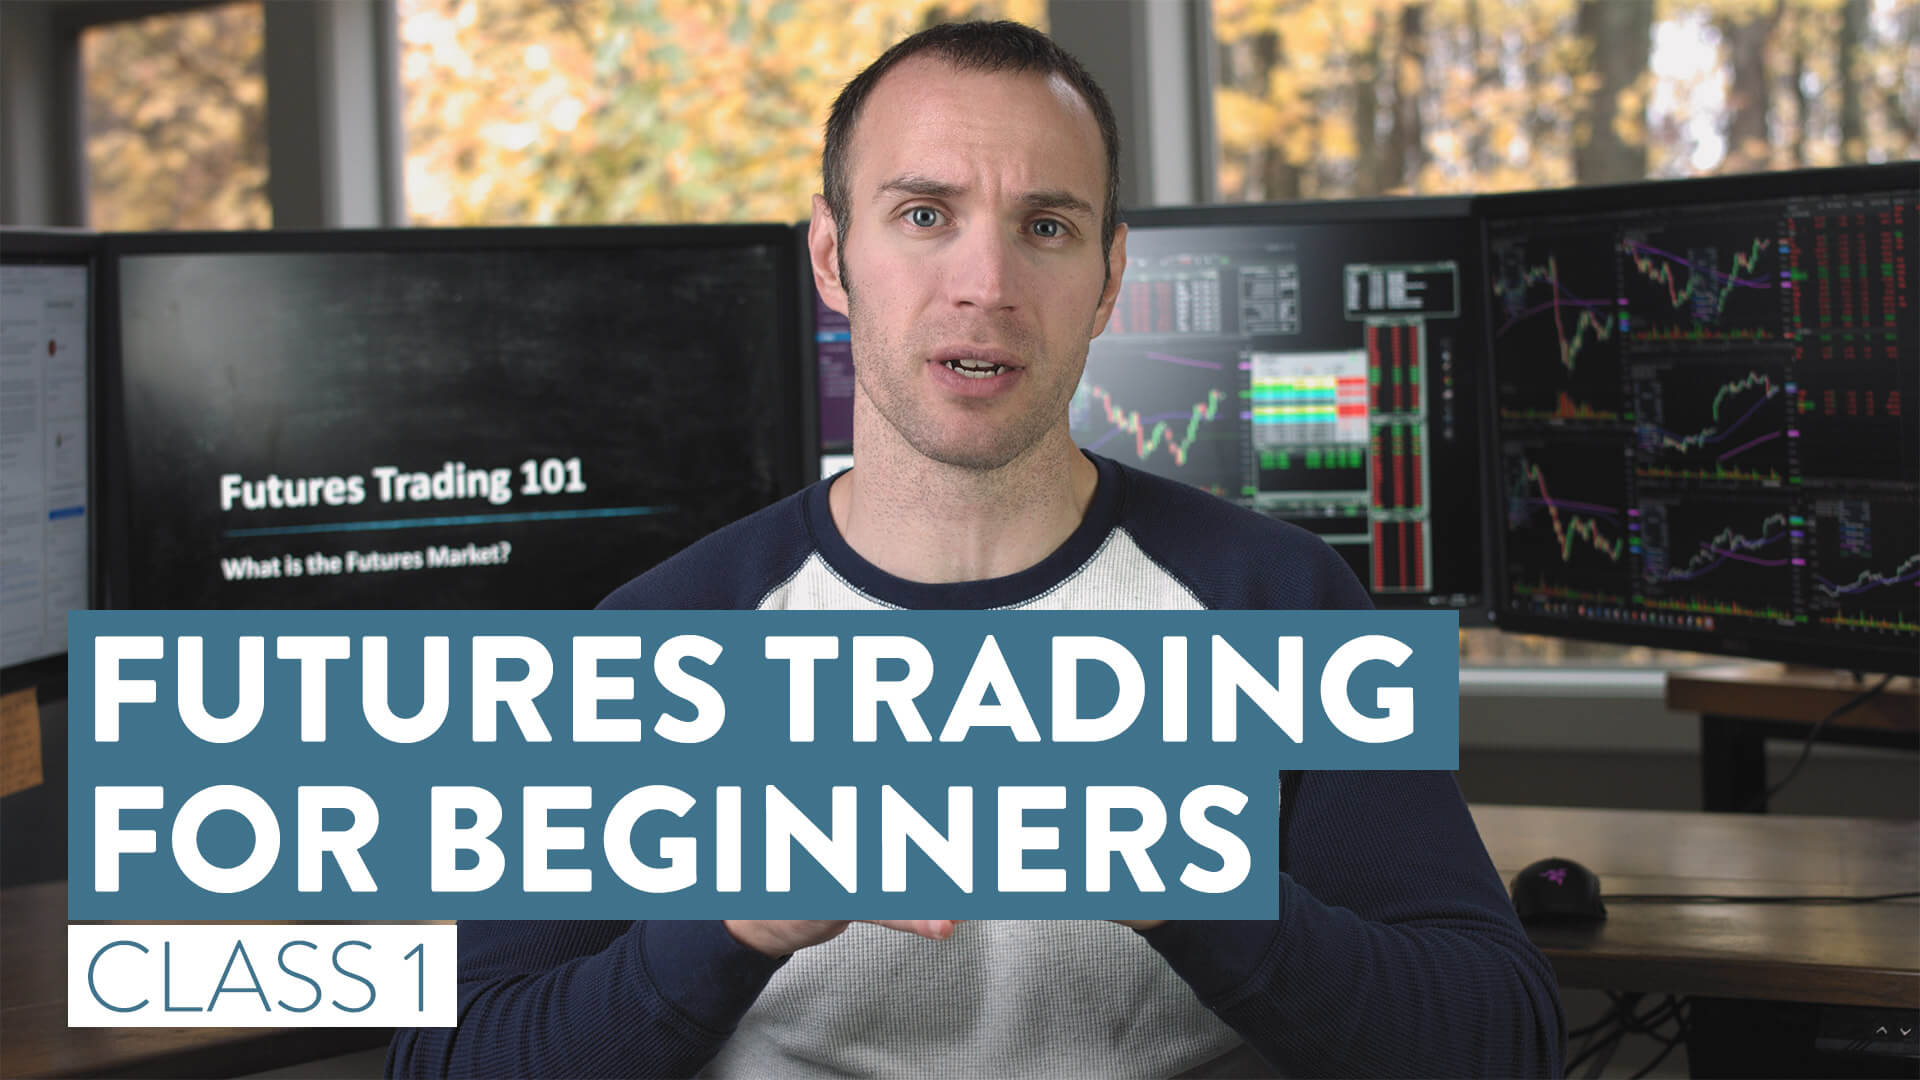 How To Trade Futures For Beginners | The Basics of Futures Trading